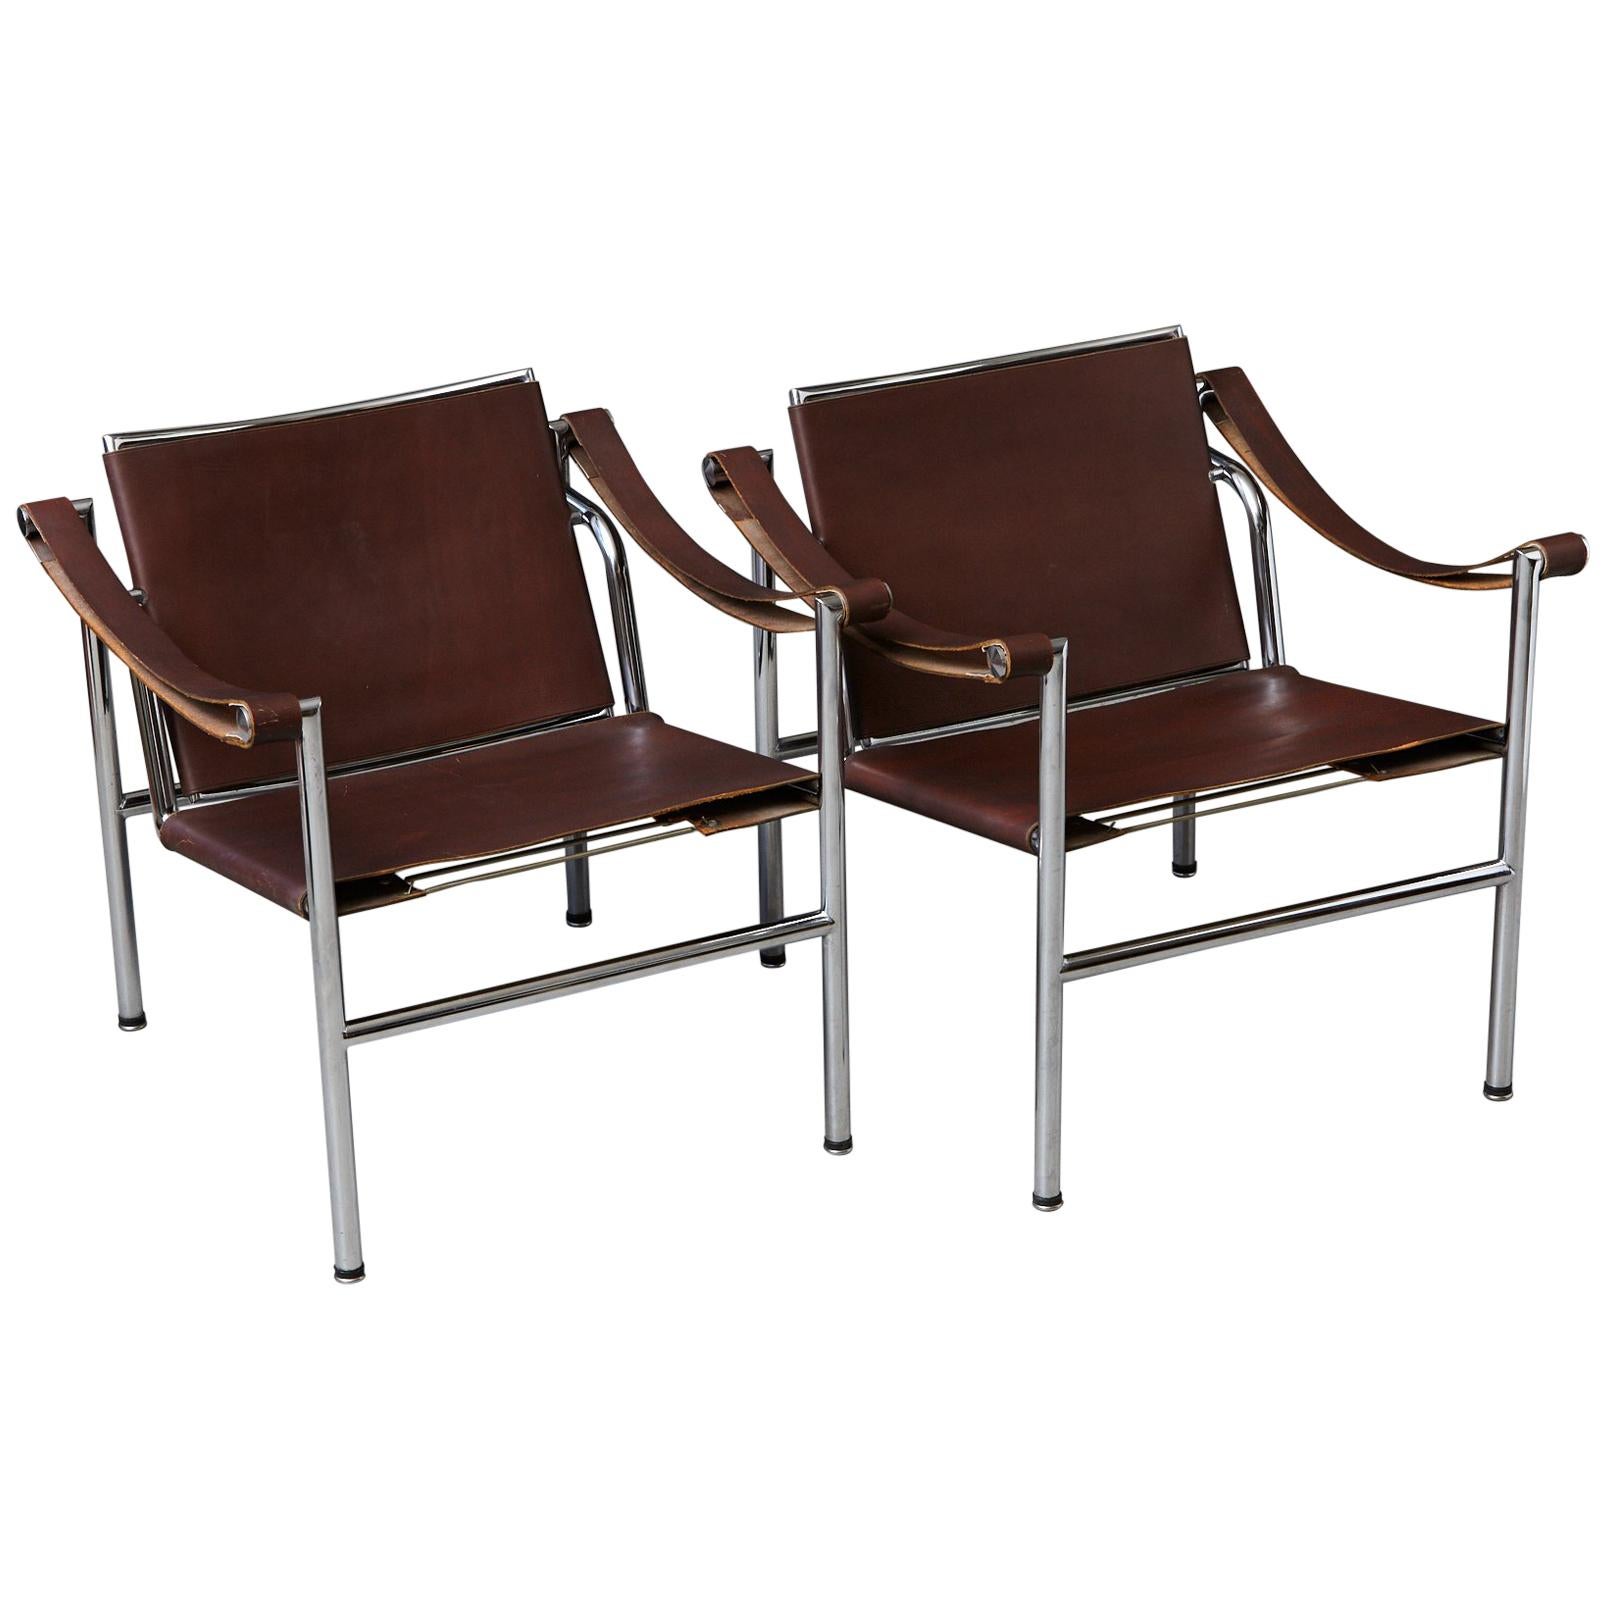 Rare Pair of Original Le Corbusier 'Corbu' Chairs 'LC1', from Wohnbedarf  1960s at 1stDibs | lc1 chair original, le corbusier chair original, corbu  chair